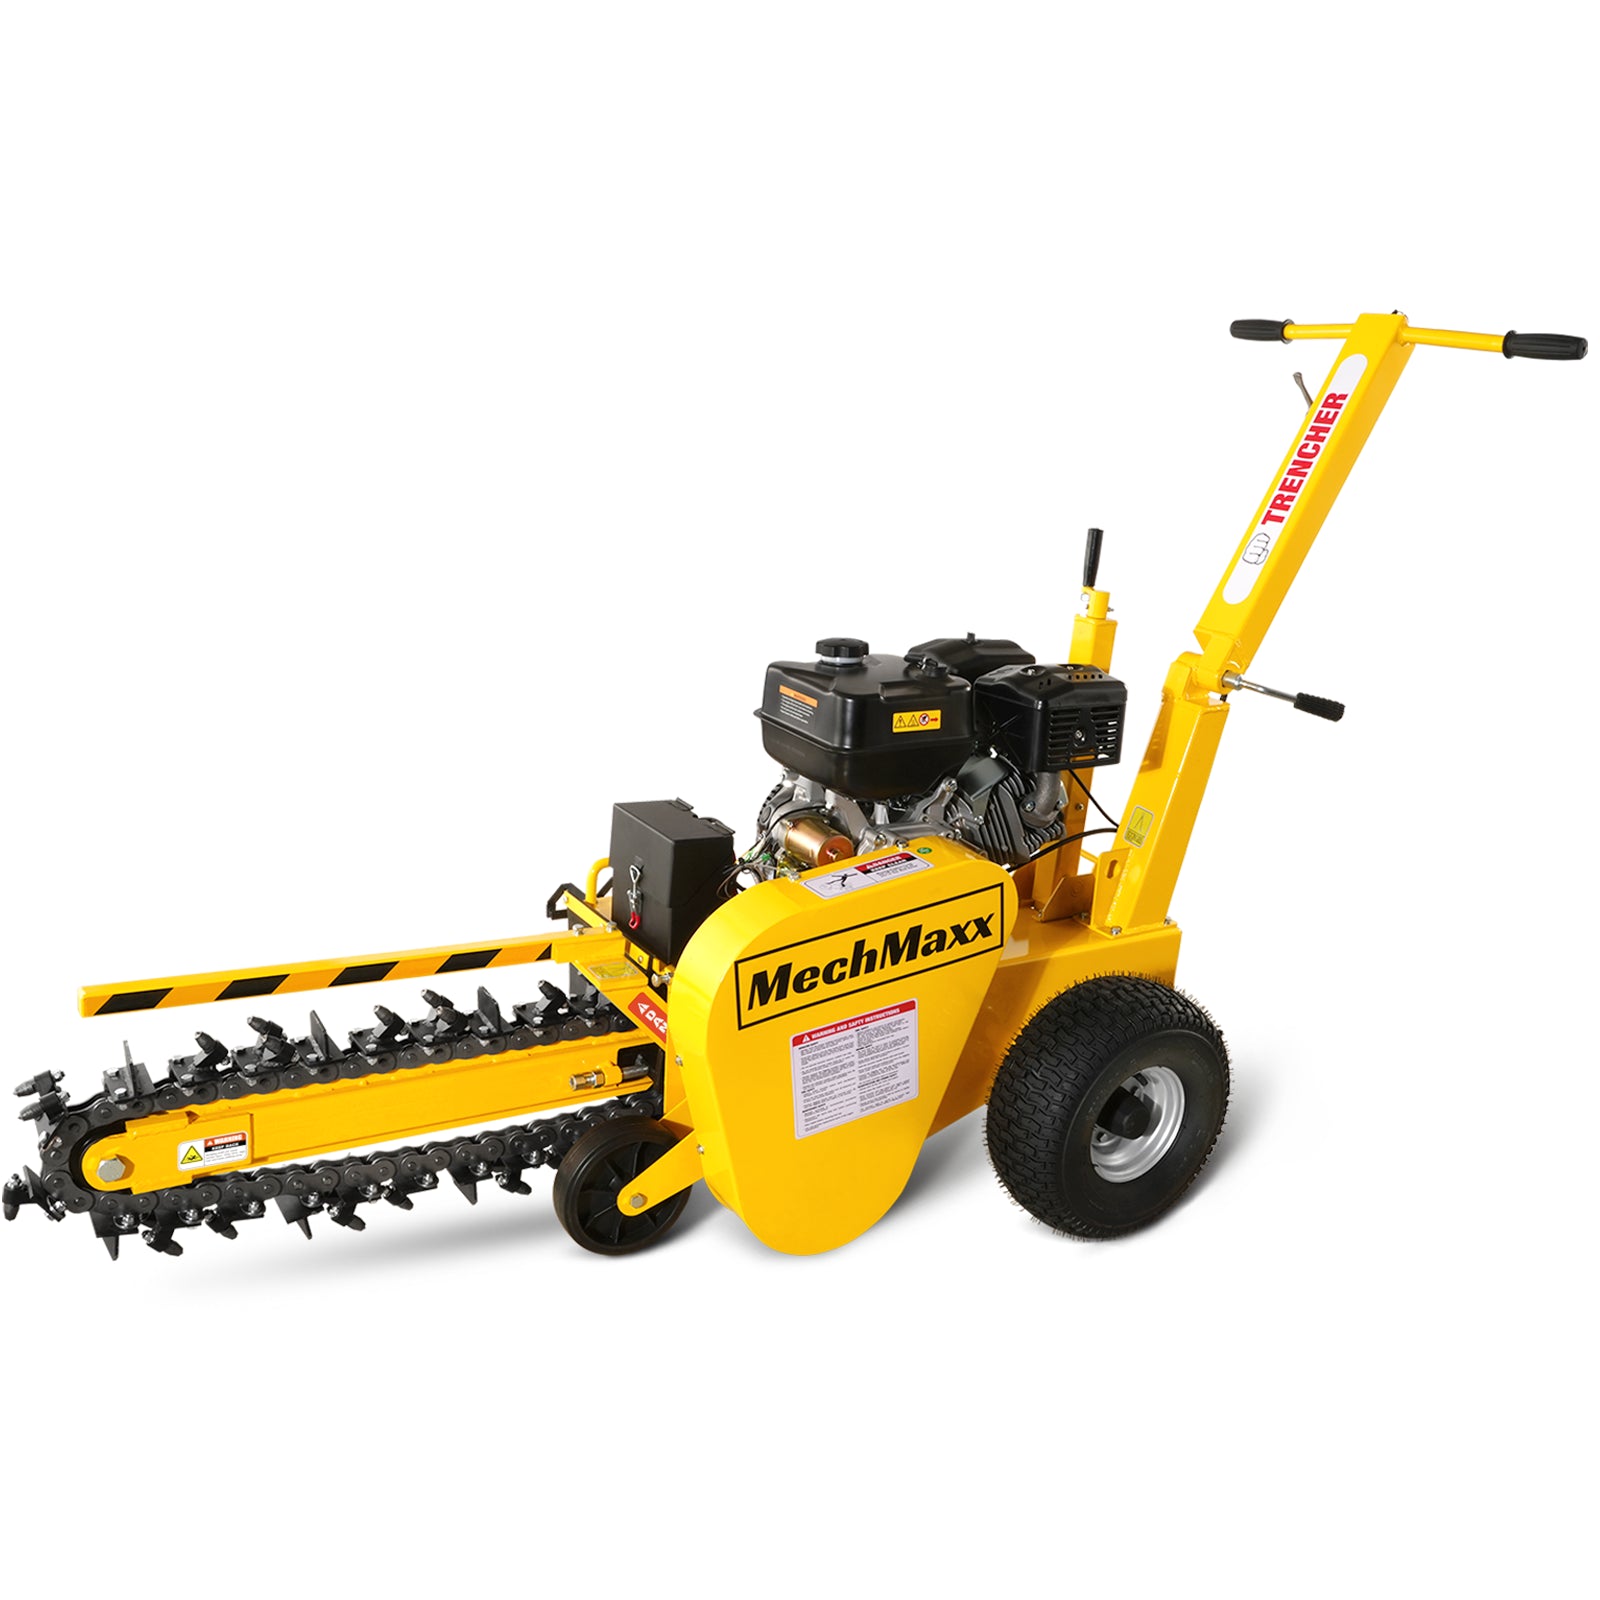 15HP 420cc E-Start Powered 24" Ditching Trencher , TCR1500